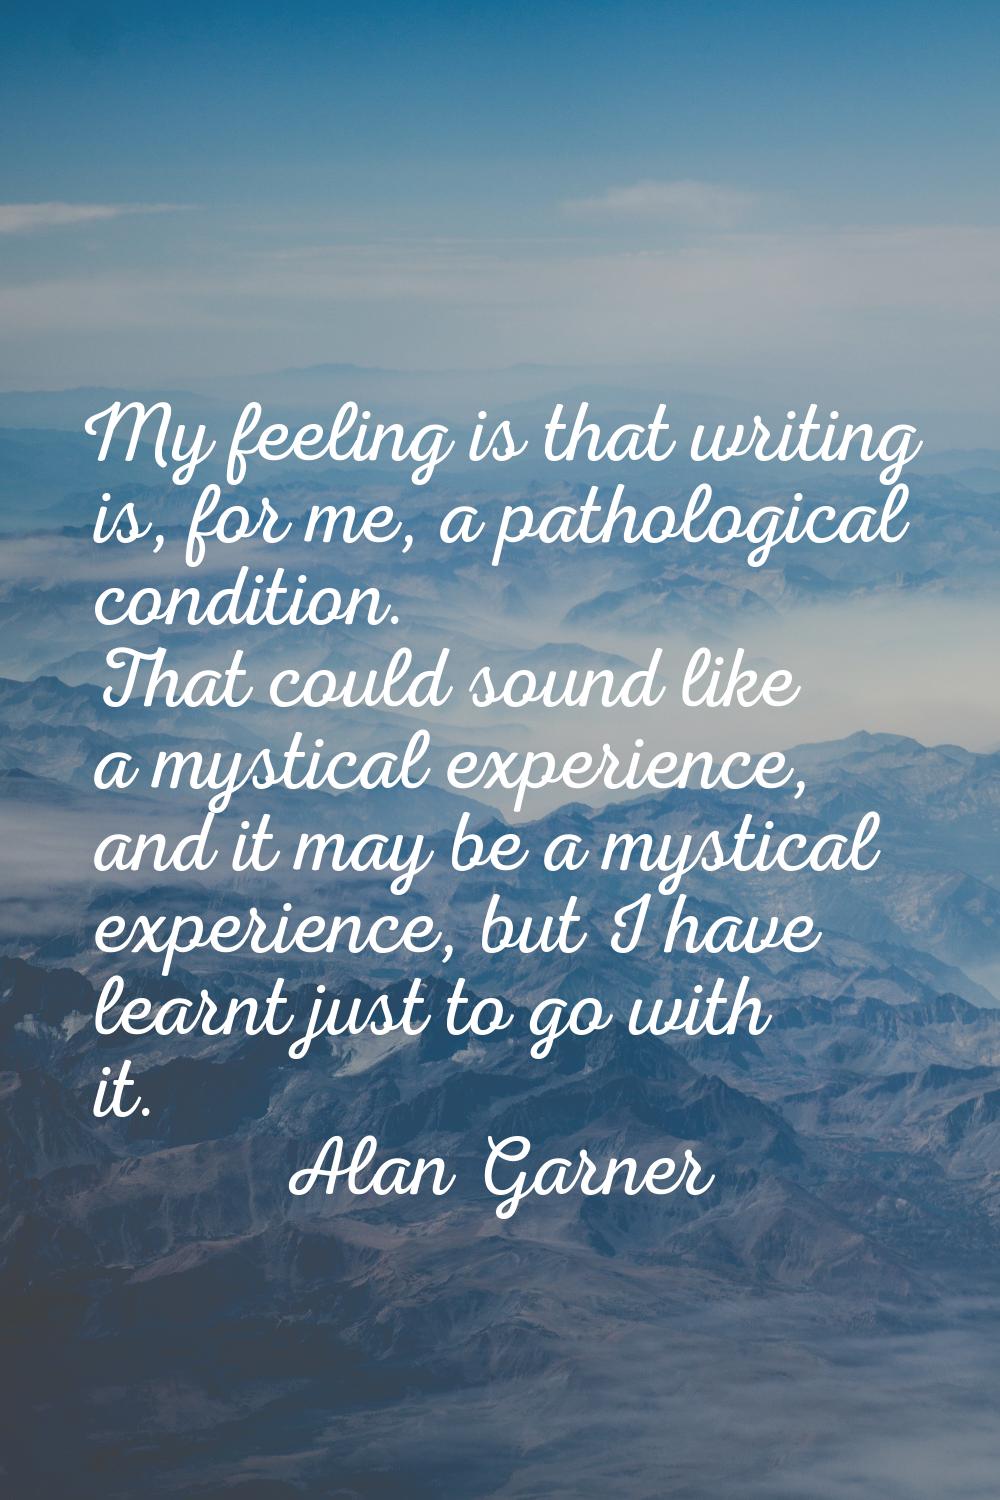 My feeling is that writing is, for me, a pathological condition. That could sound like a mystical e